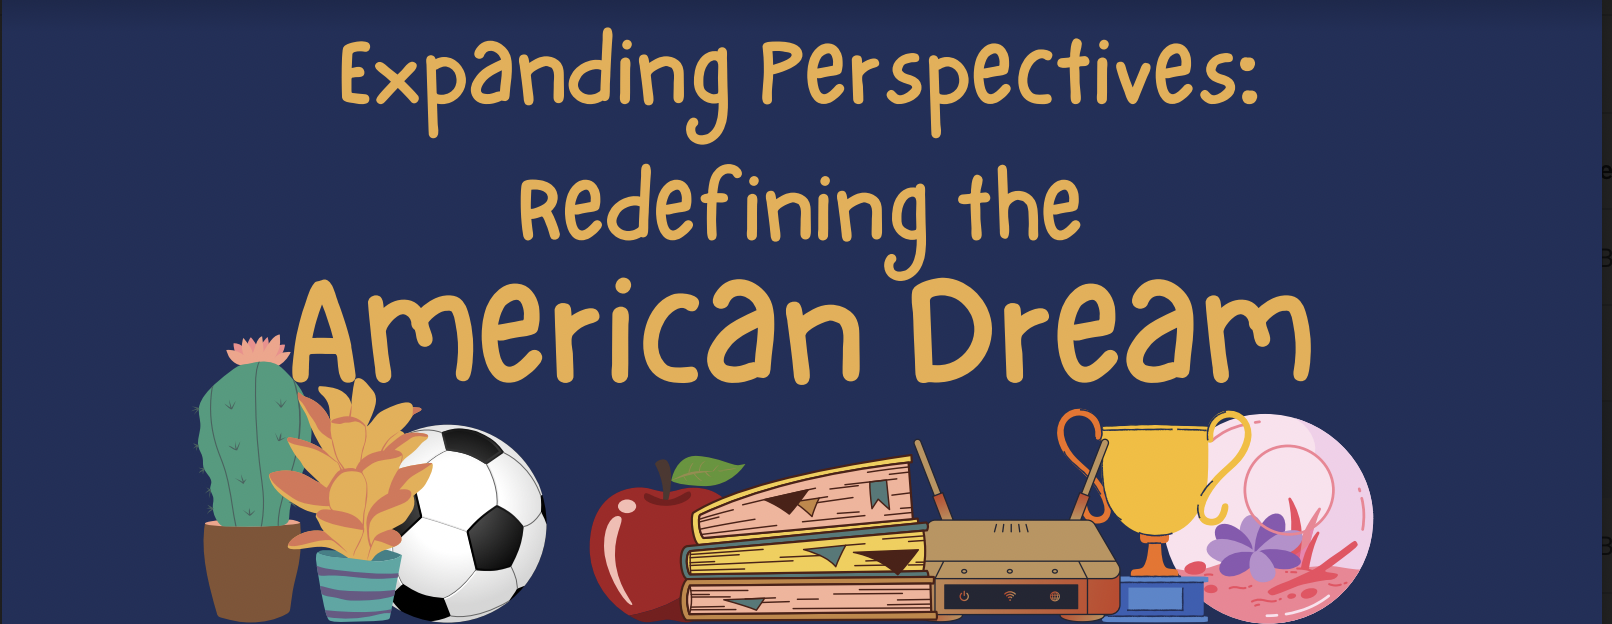 Expanding Perspectives: Redefining the American Dream